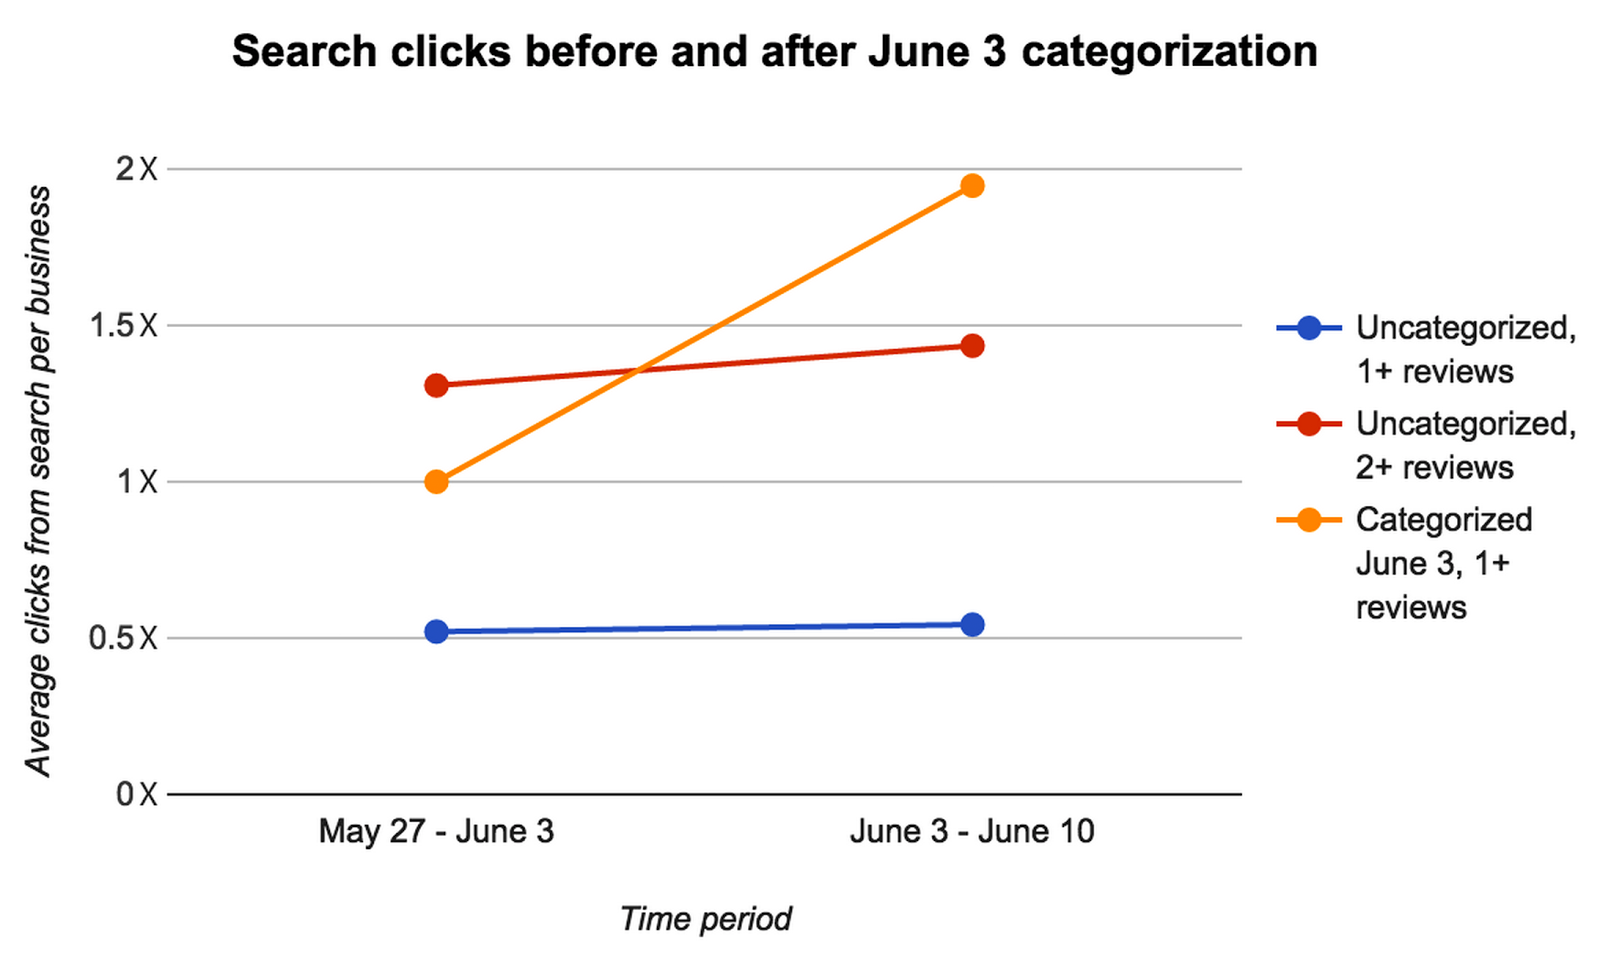 The orange line shows that after categorization, businesses received approximately twice as many clicks (on average). The blue and red control lines, representing businesses which were not categorized, show that this change is due to categorization, instead of extraneous factors, like increased overall traffic or faulty metrics. (We abstracted the exact number of clicks, since that is non-public information.)